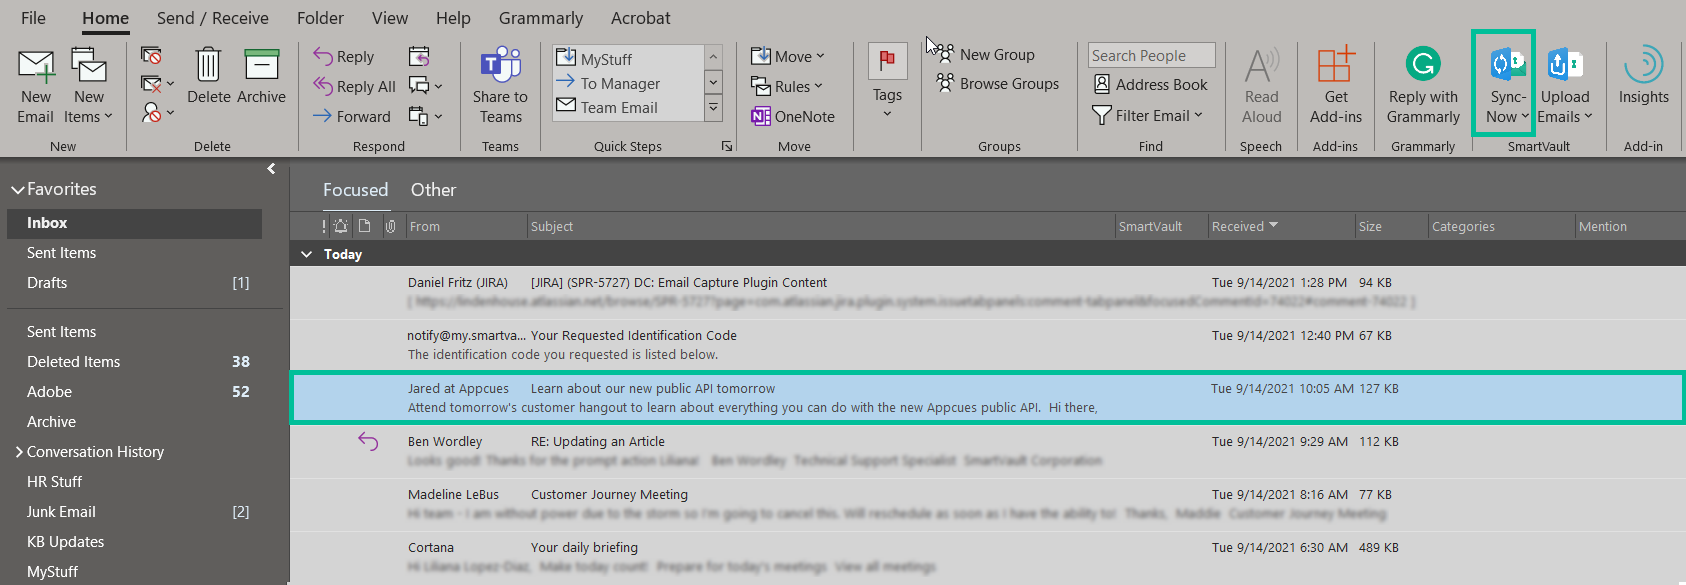 Outlook_plug-in_-_select_email_and_sync.png